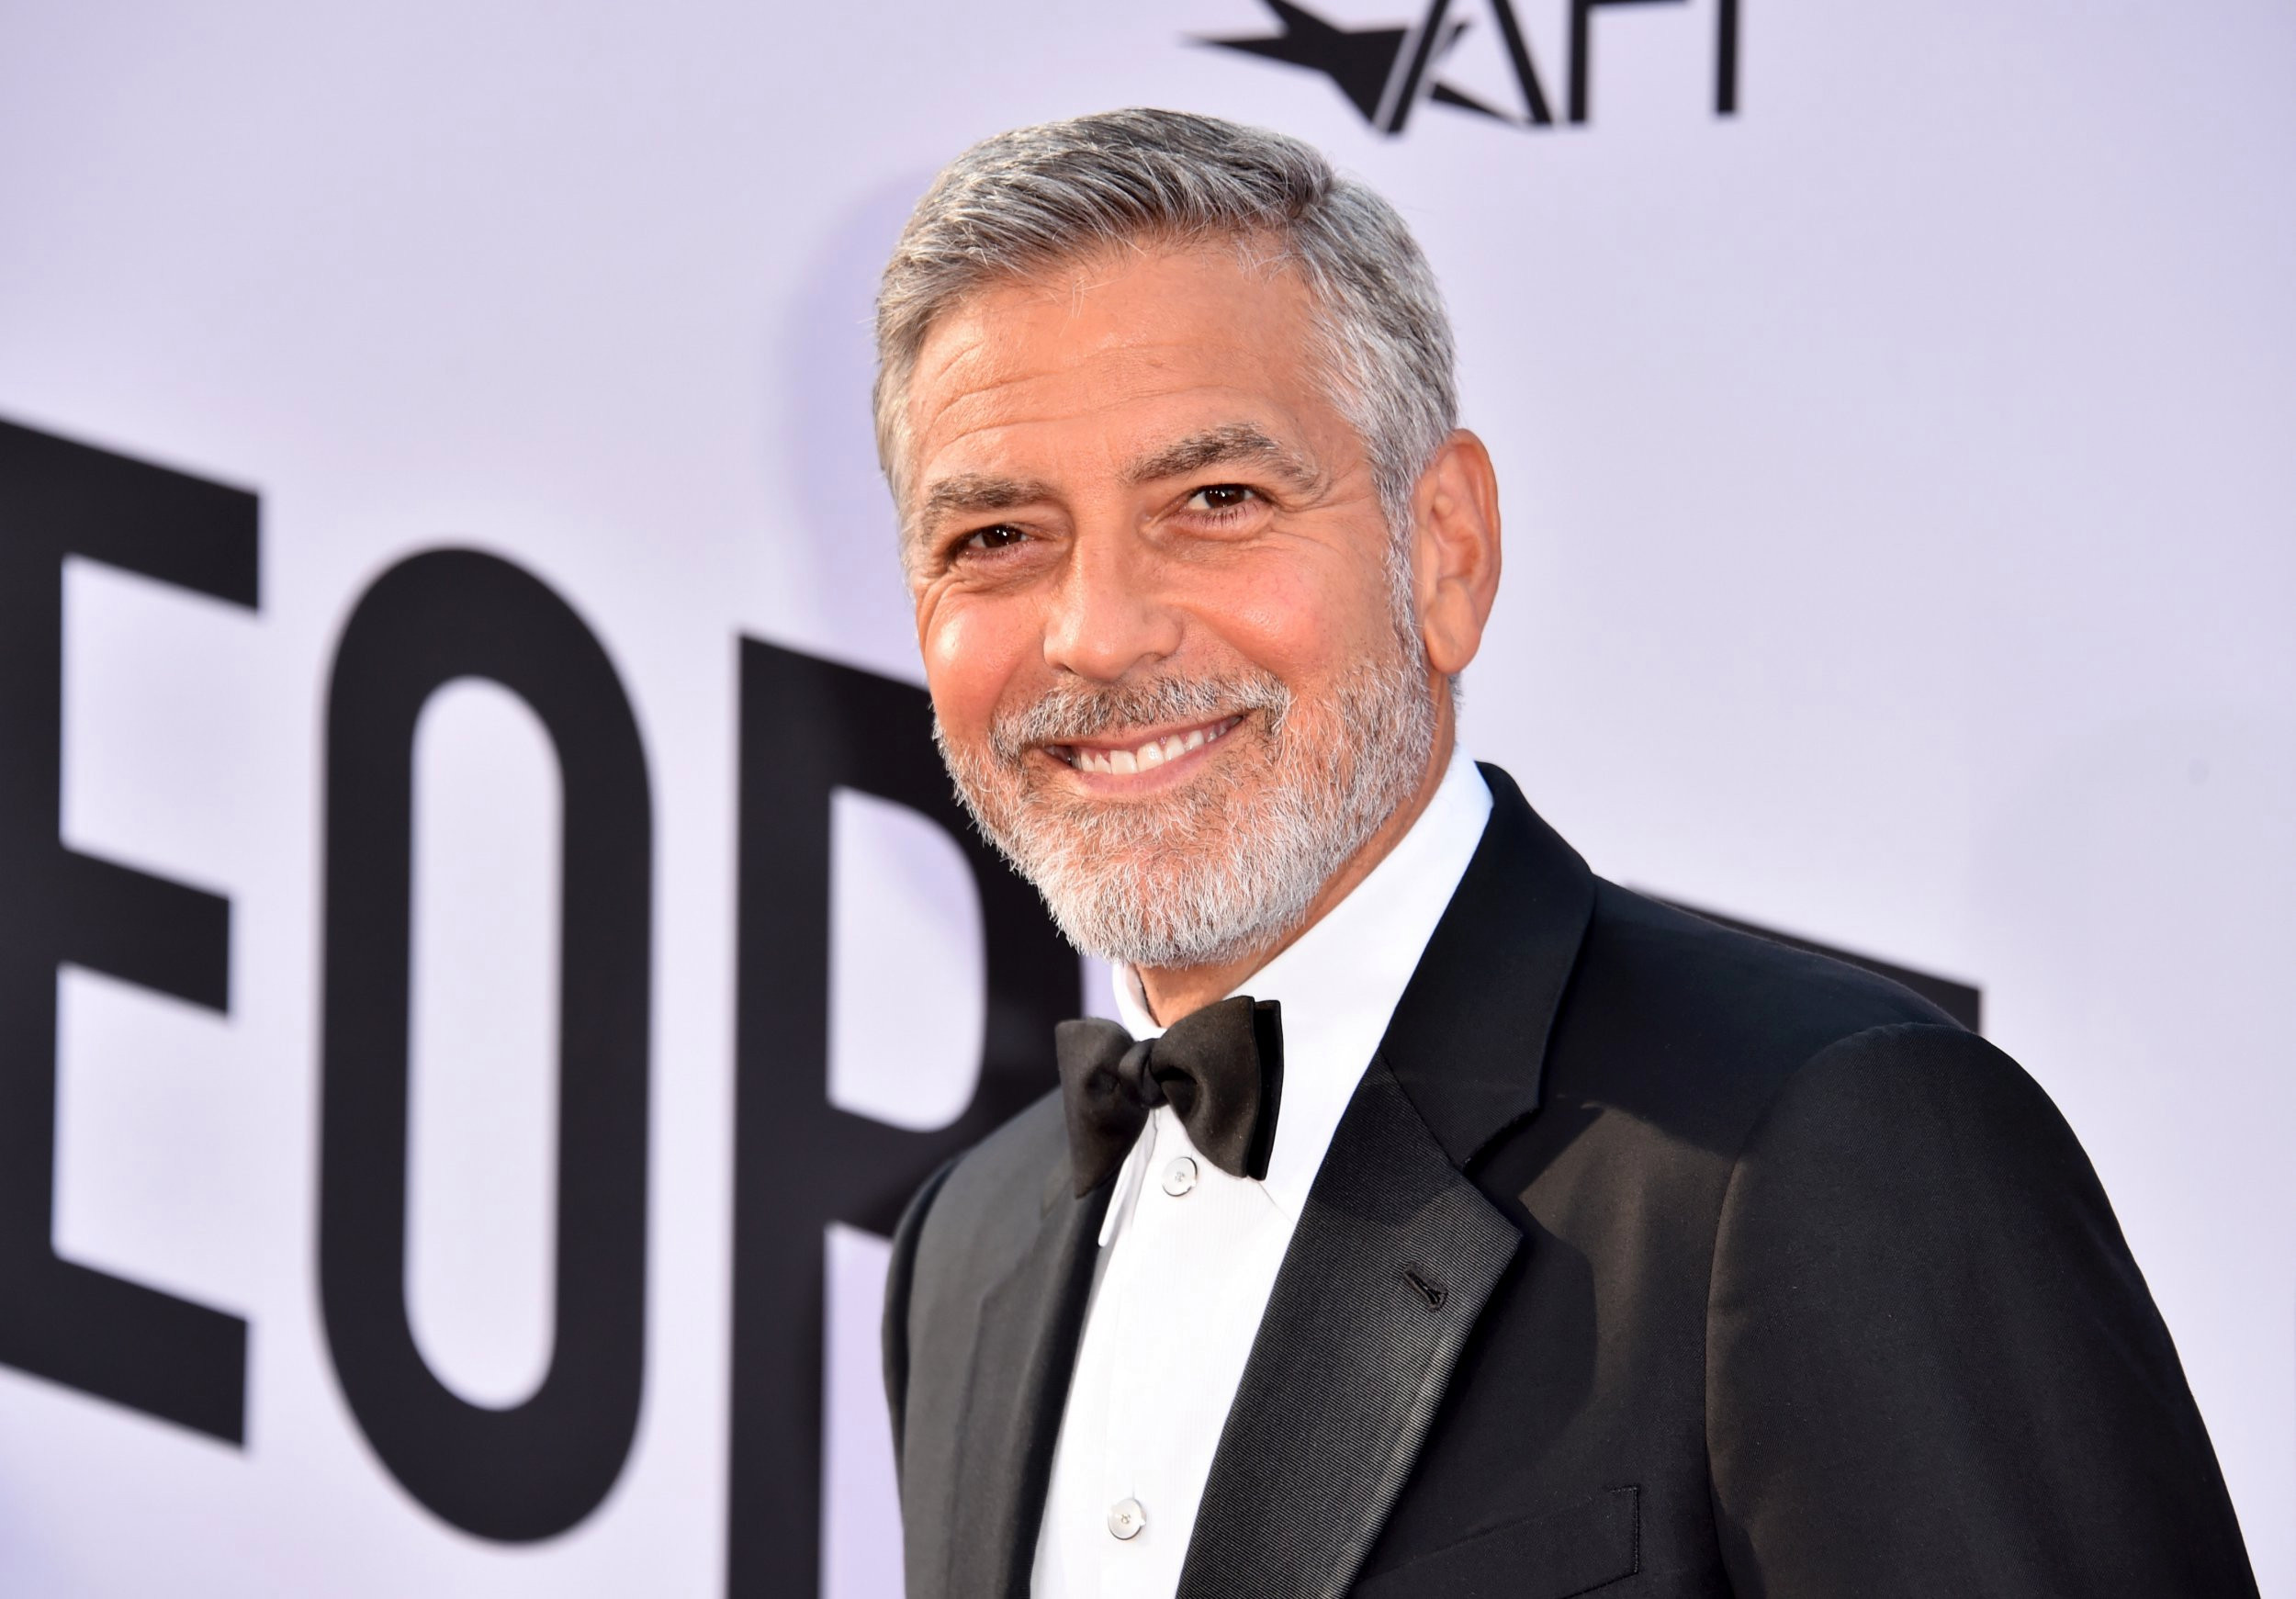 George Clooney reveals he’s been sewing clothes in lockdown as he proves he’s the ultimate handyman